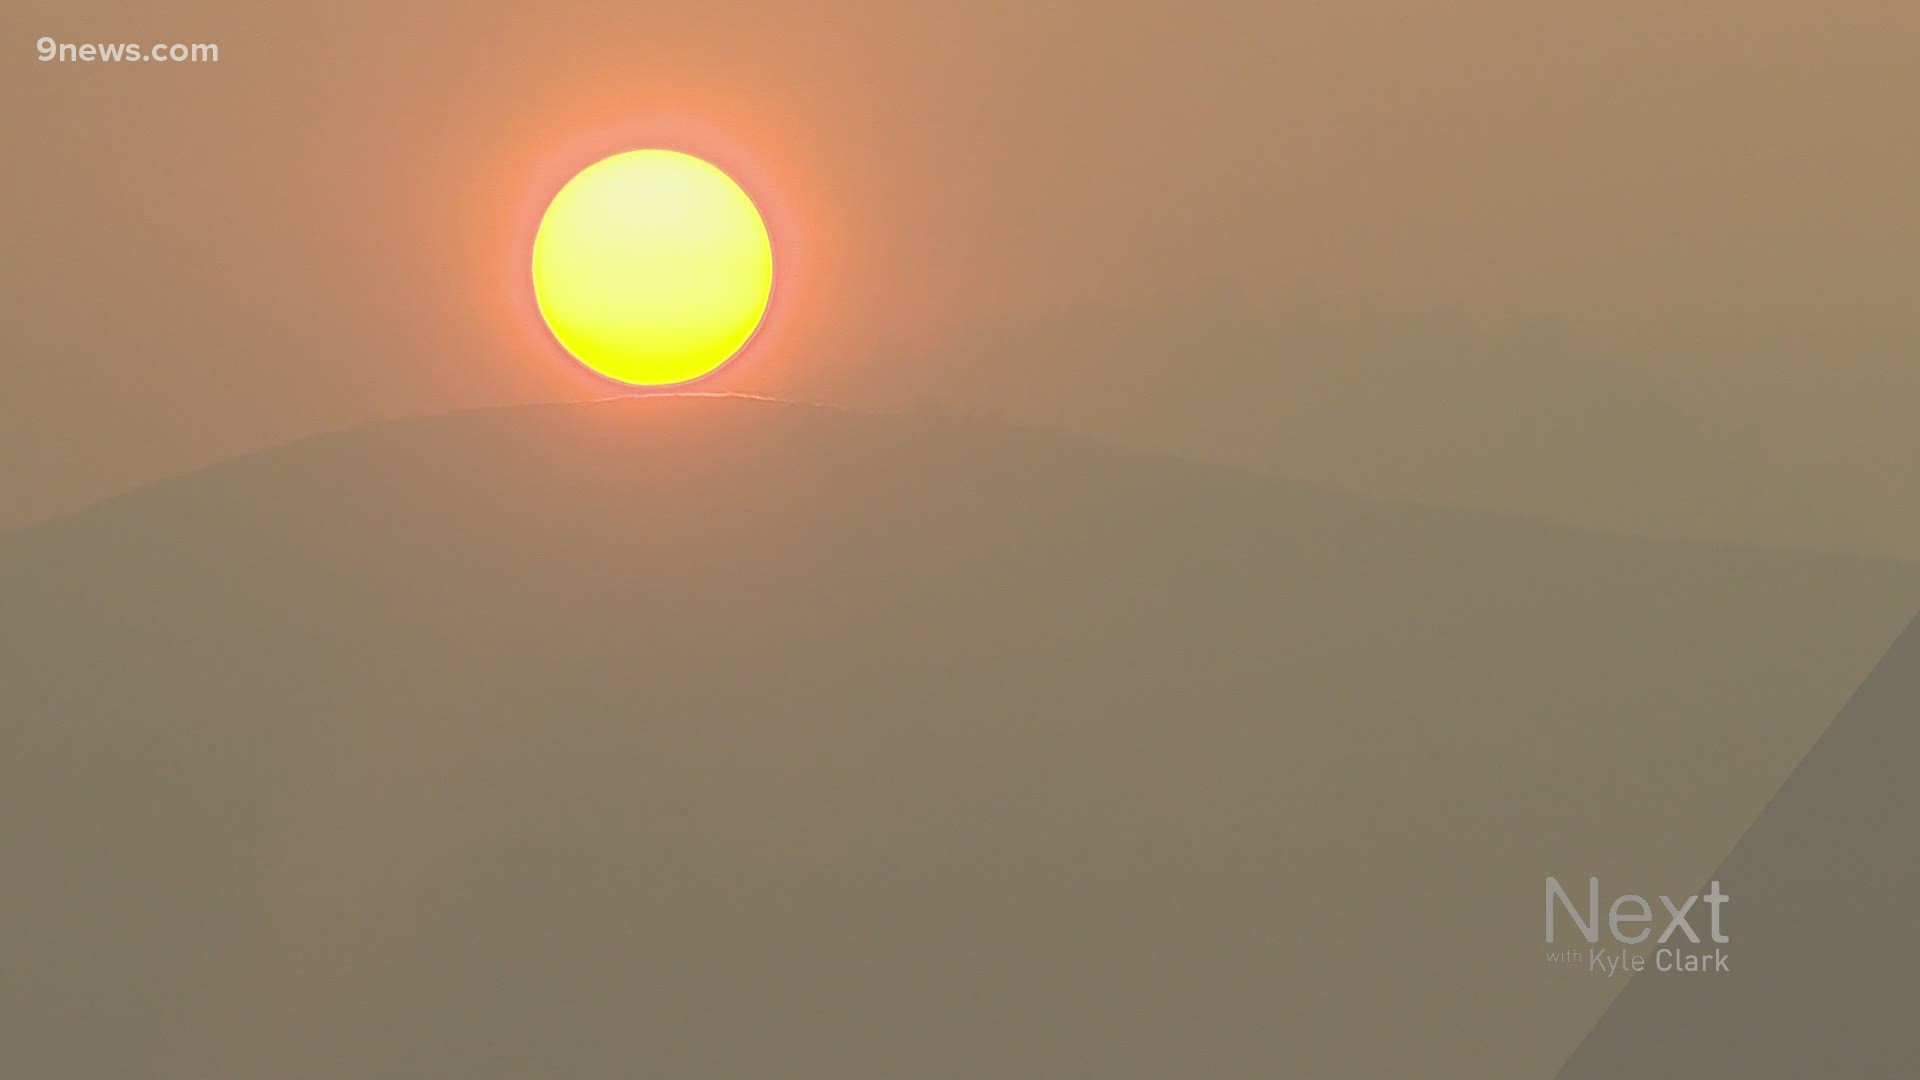 It's a unique line-up of health concerns: wildfire smoke and COVID-19 are both happening now in Colorado. The impact of this combination still needs research.